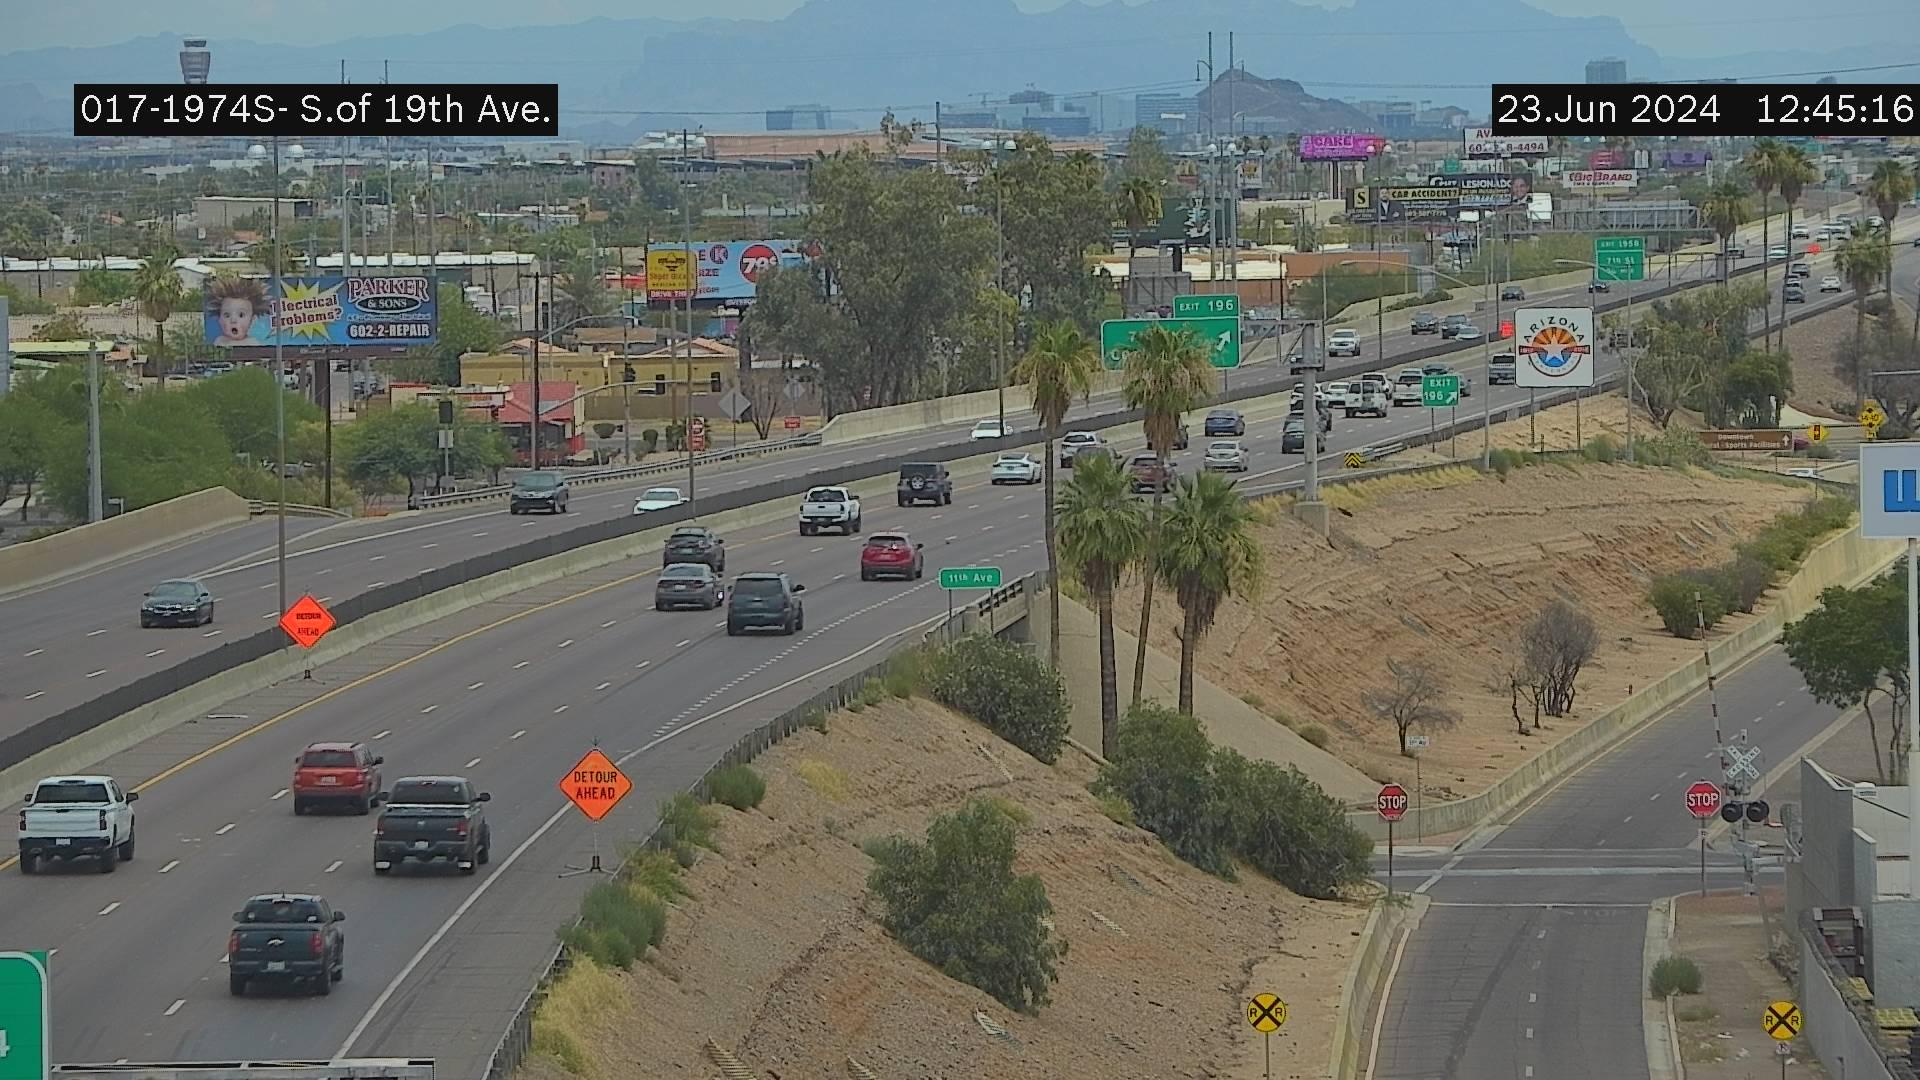 Traffic Cam Phoenix › South: I-17 SB 197.40 @S of 19th Ave Player